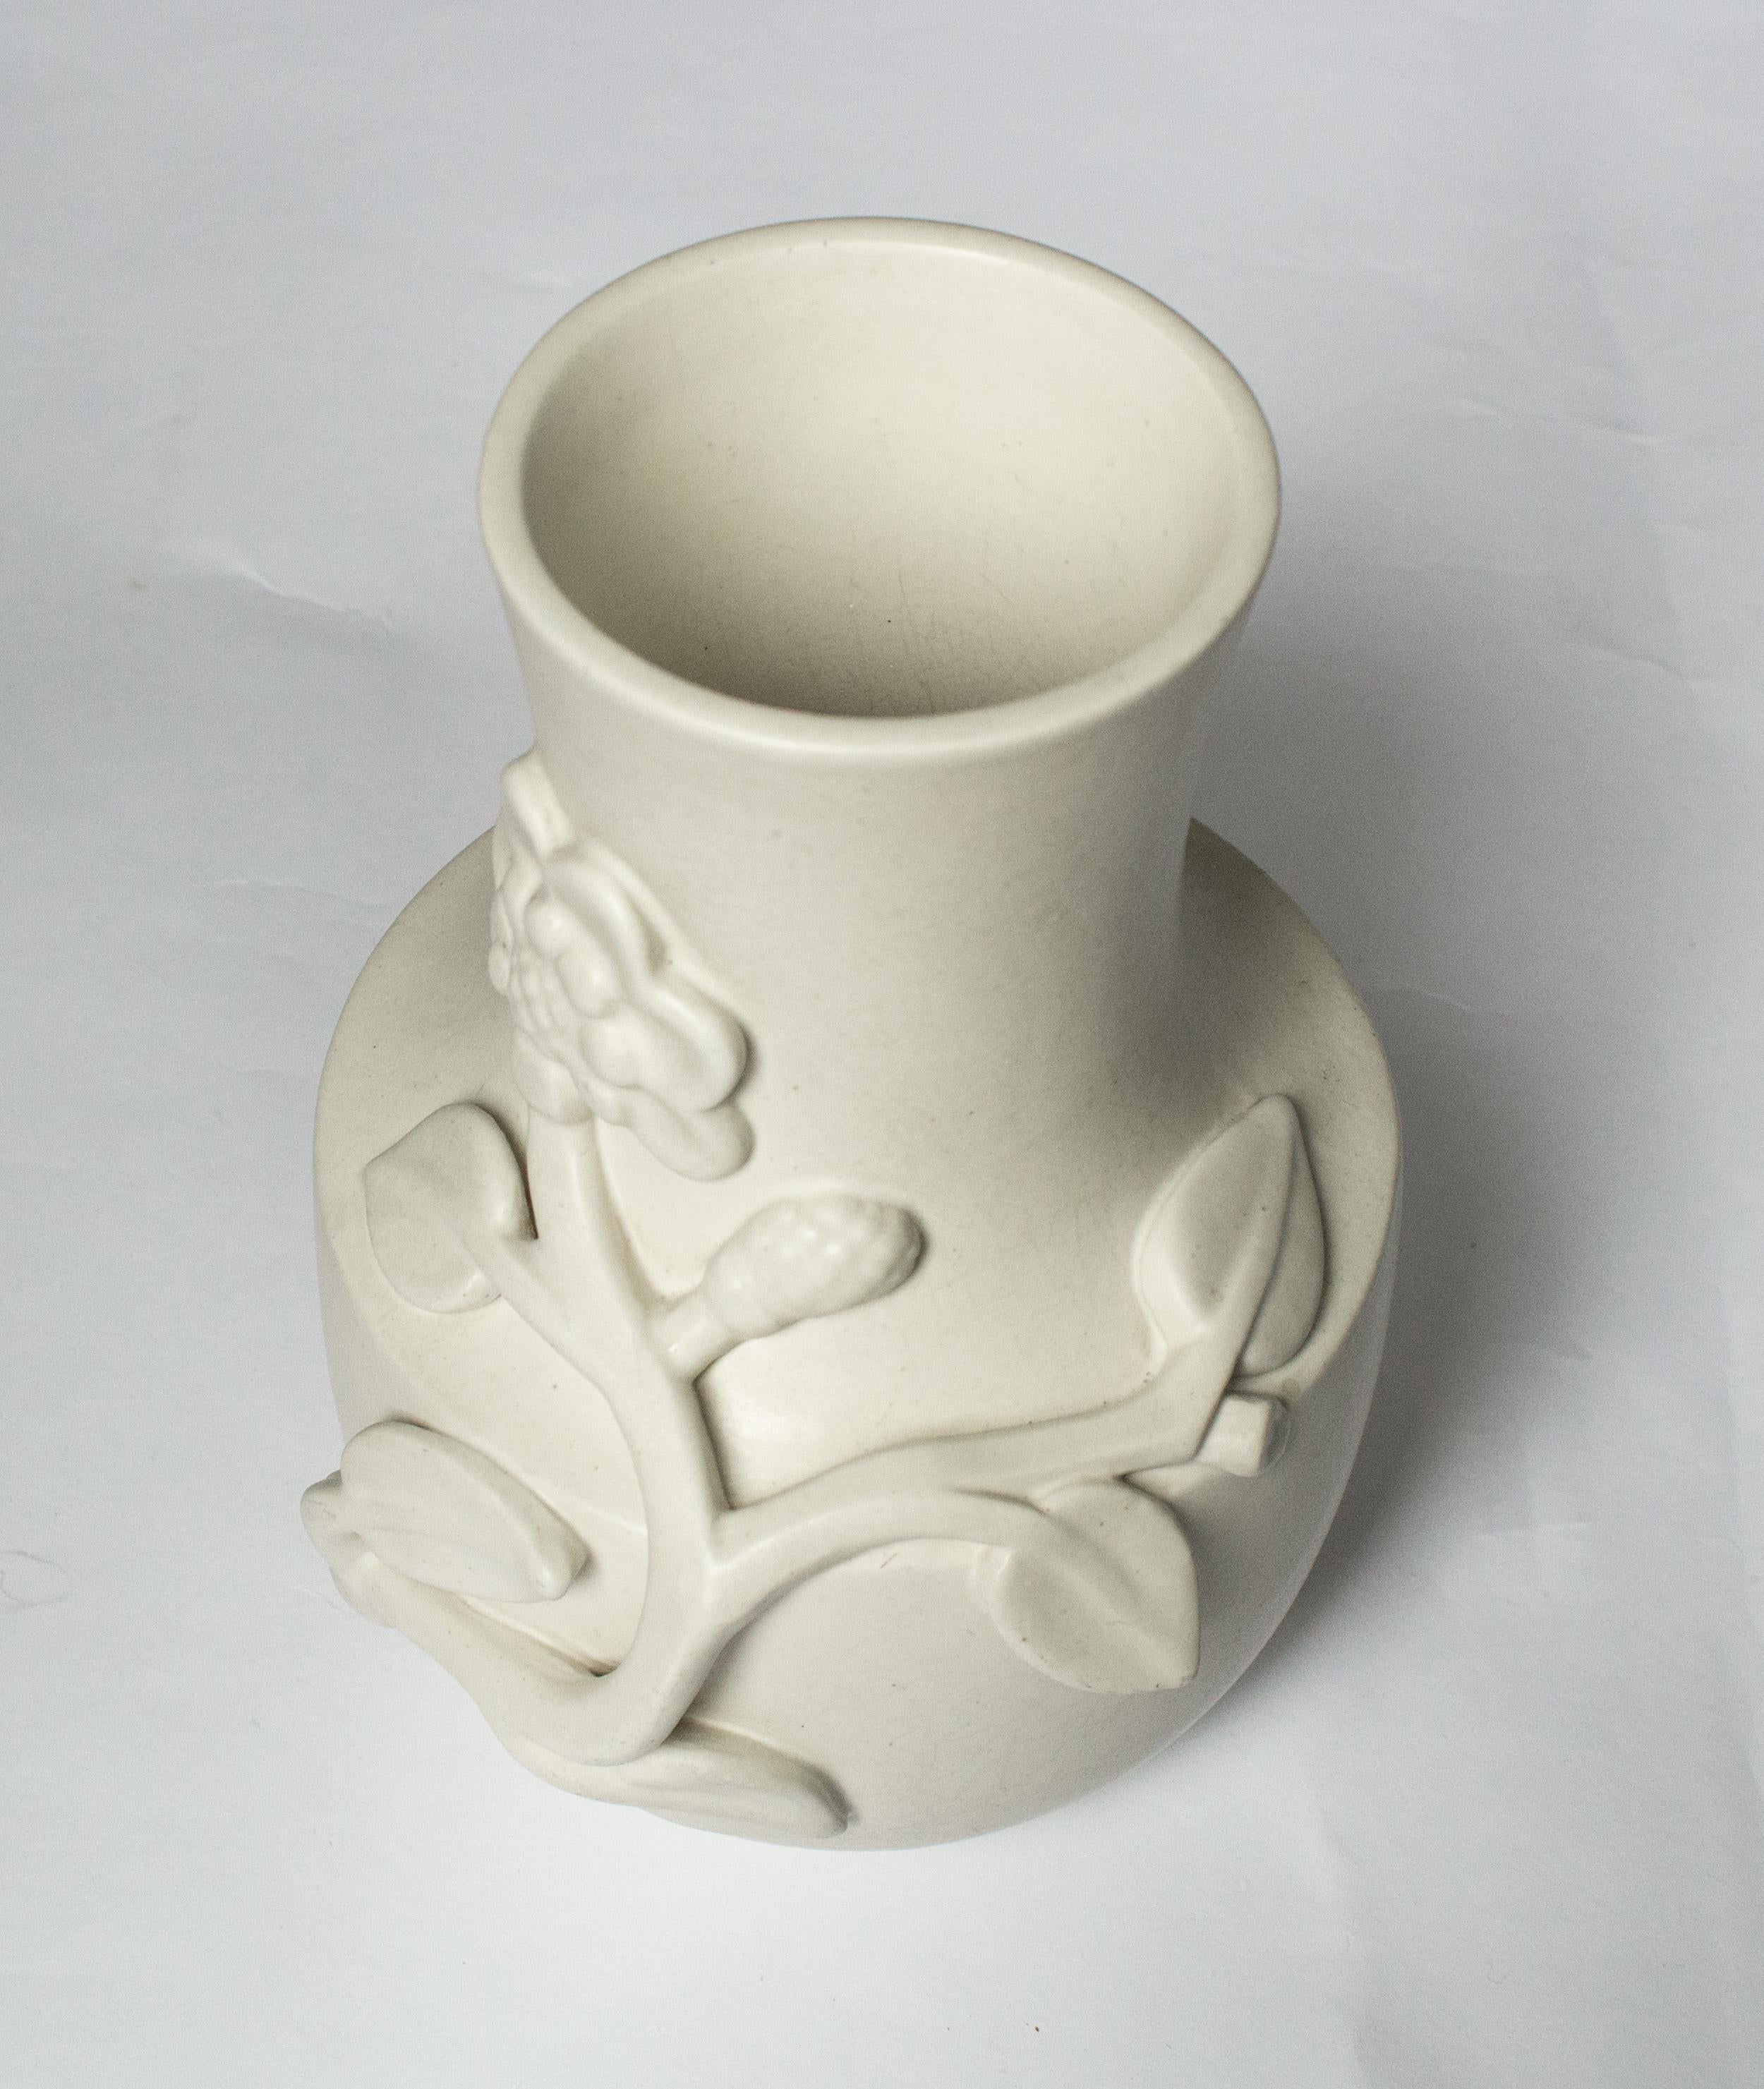 Beautiful “Surrea” vase by Wilhelm Kåge, made in Carrara stoneware. The design are Kåge’s best from the 1930s Produced in Sweden by Gustavsberg during the 1940s.